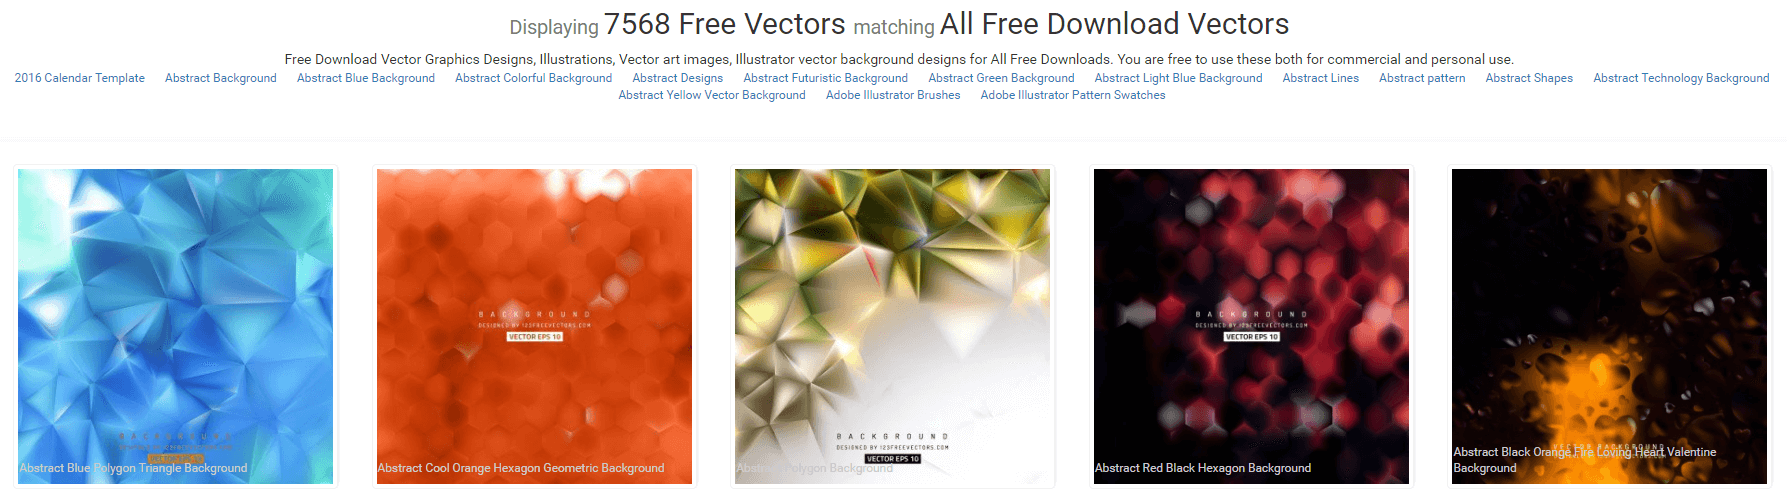 The 123 FreeVectors homepage.